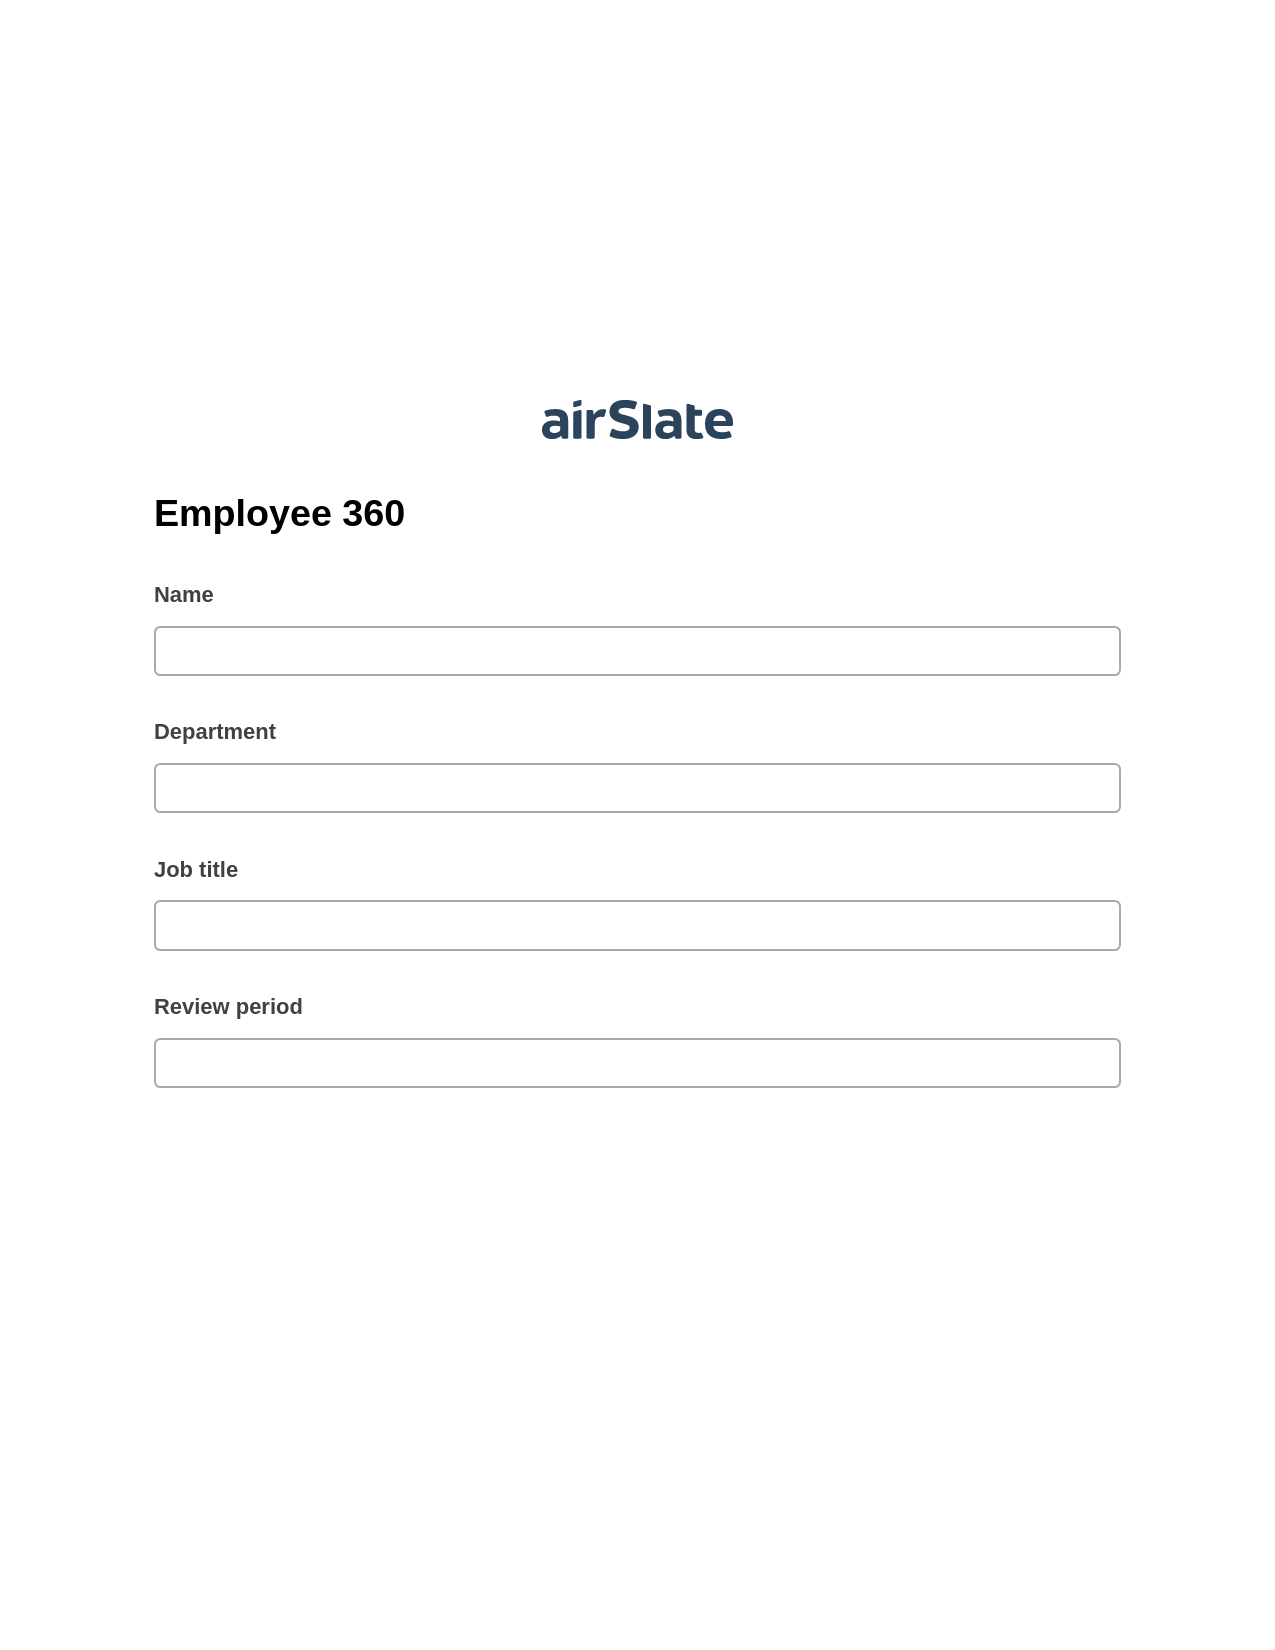 Employee 360 Pre-fill from MySQL Bot, Remove Tags From Slate Bot, Export to Smartsheet